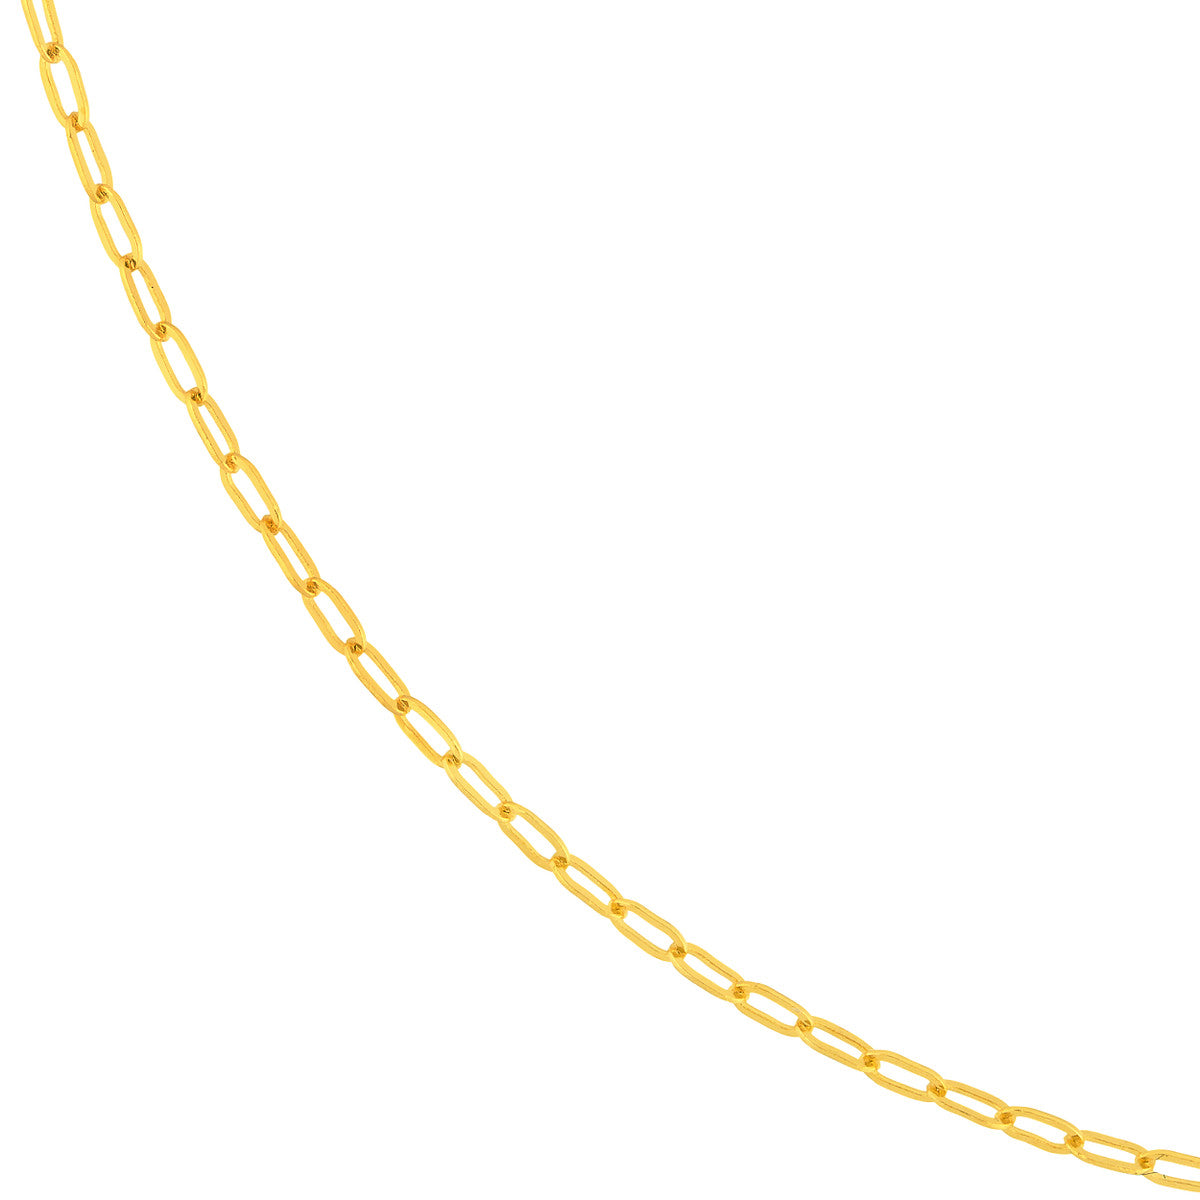 14k Yellow Gold 1.3mm Paperclip Adjustable Choker Chain Necklace with Spring Ring, 15 Inches